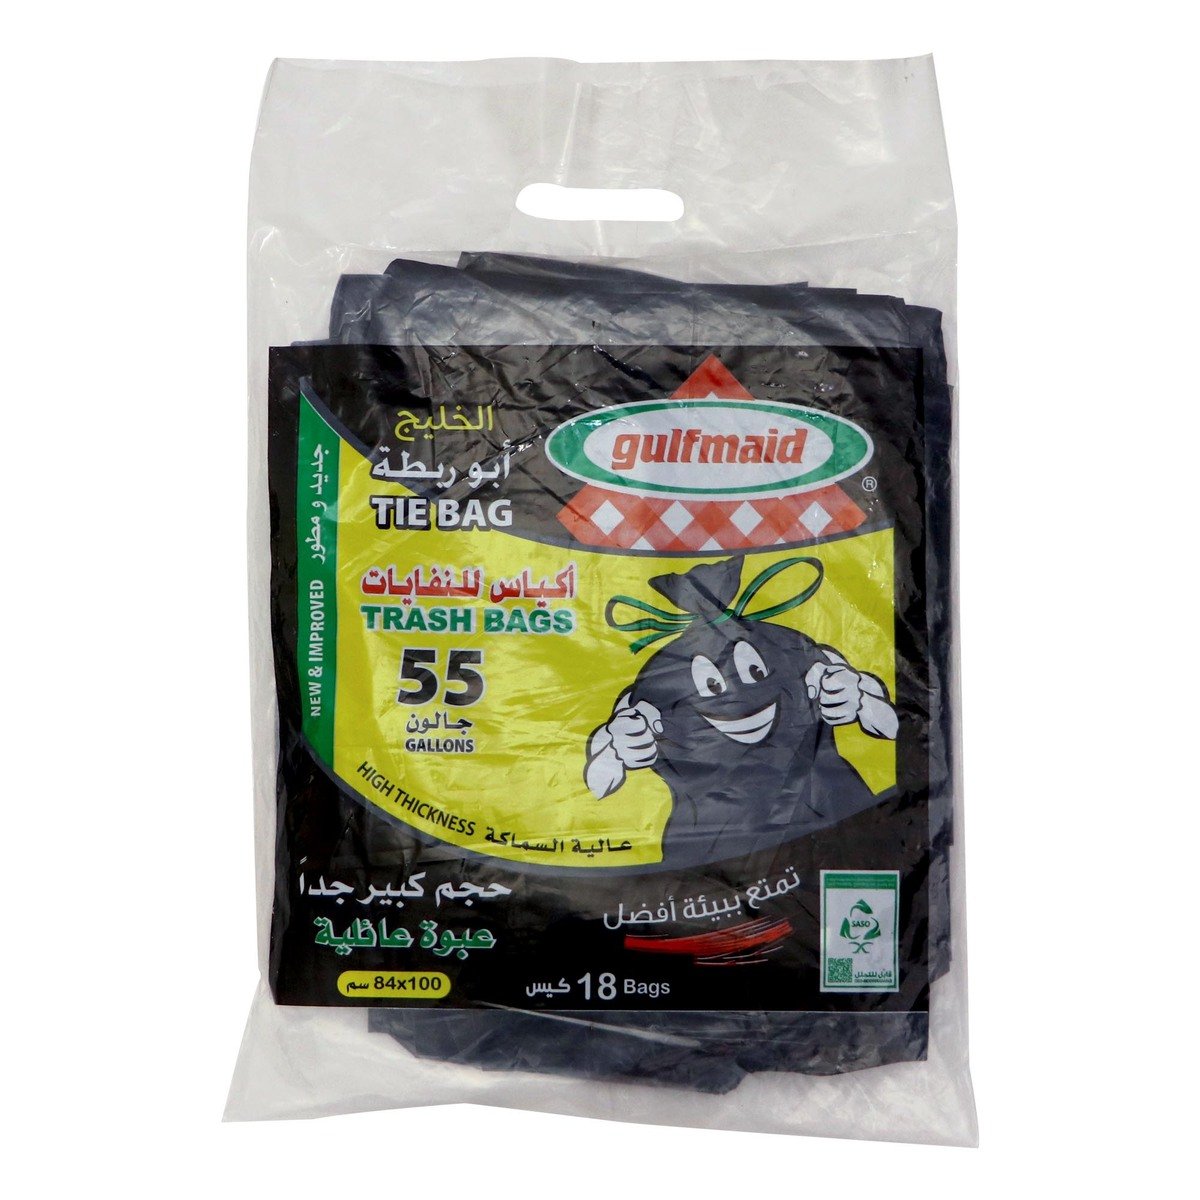 Gulfmaid Trash Bags Tie Bags 55 Gallons 18pcs